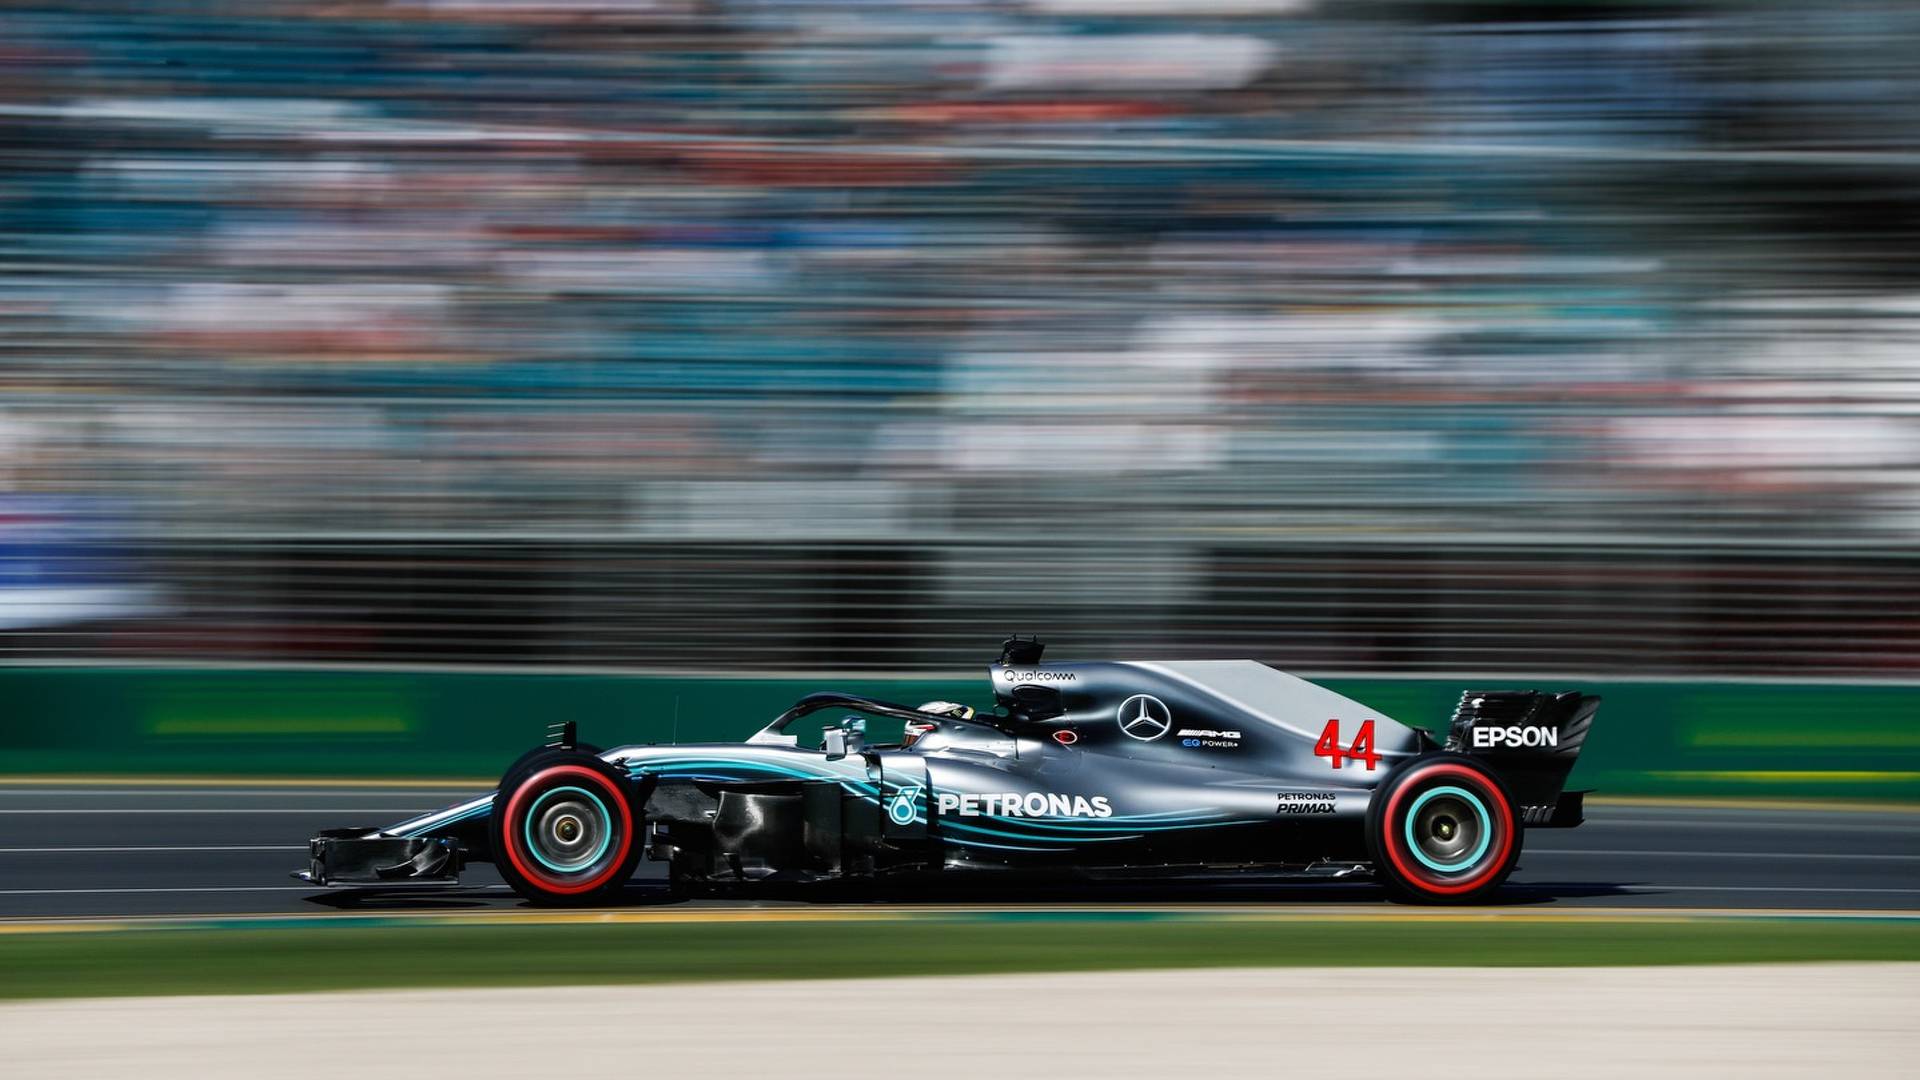 Lewis Hamilton says it's exciting that F1 rivals are catching up